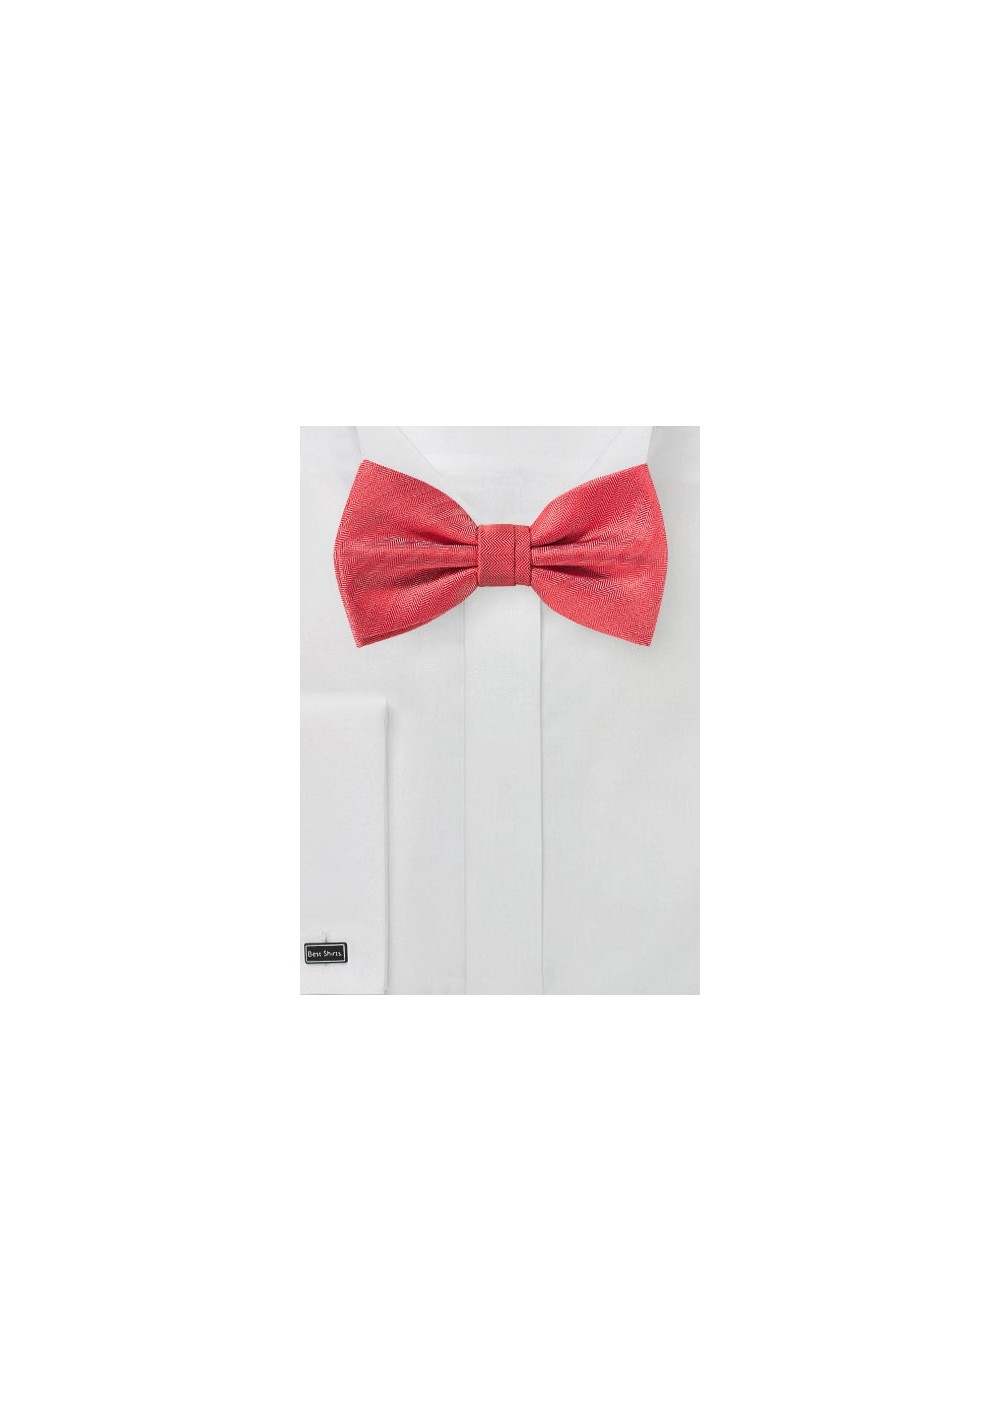 Bright Red Textured Bow Tie